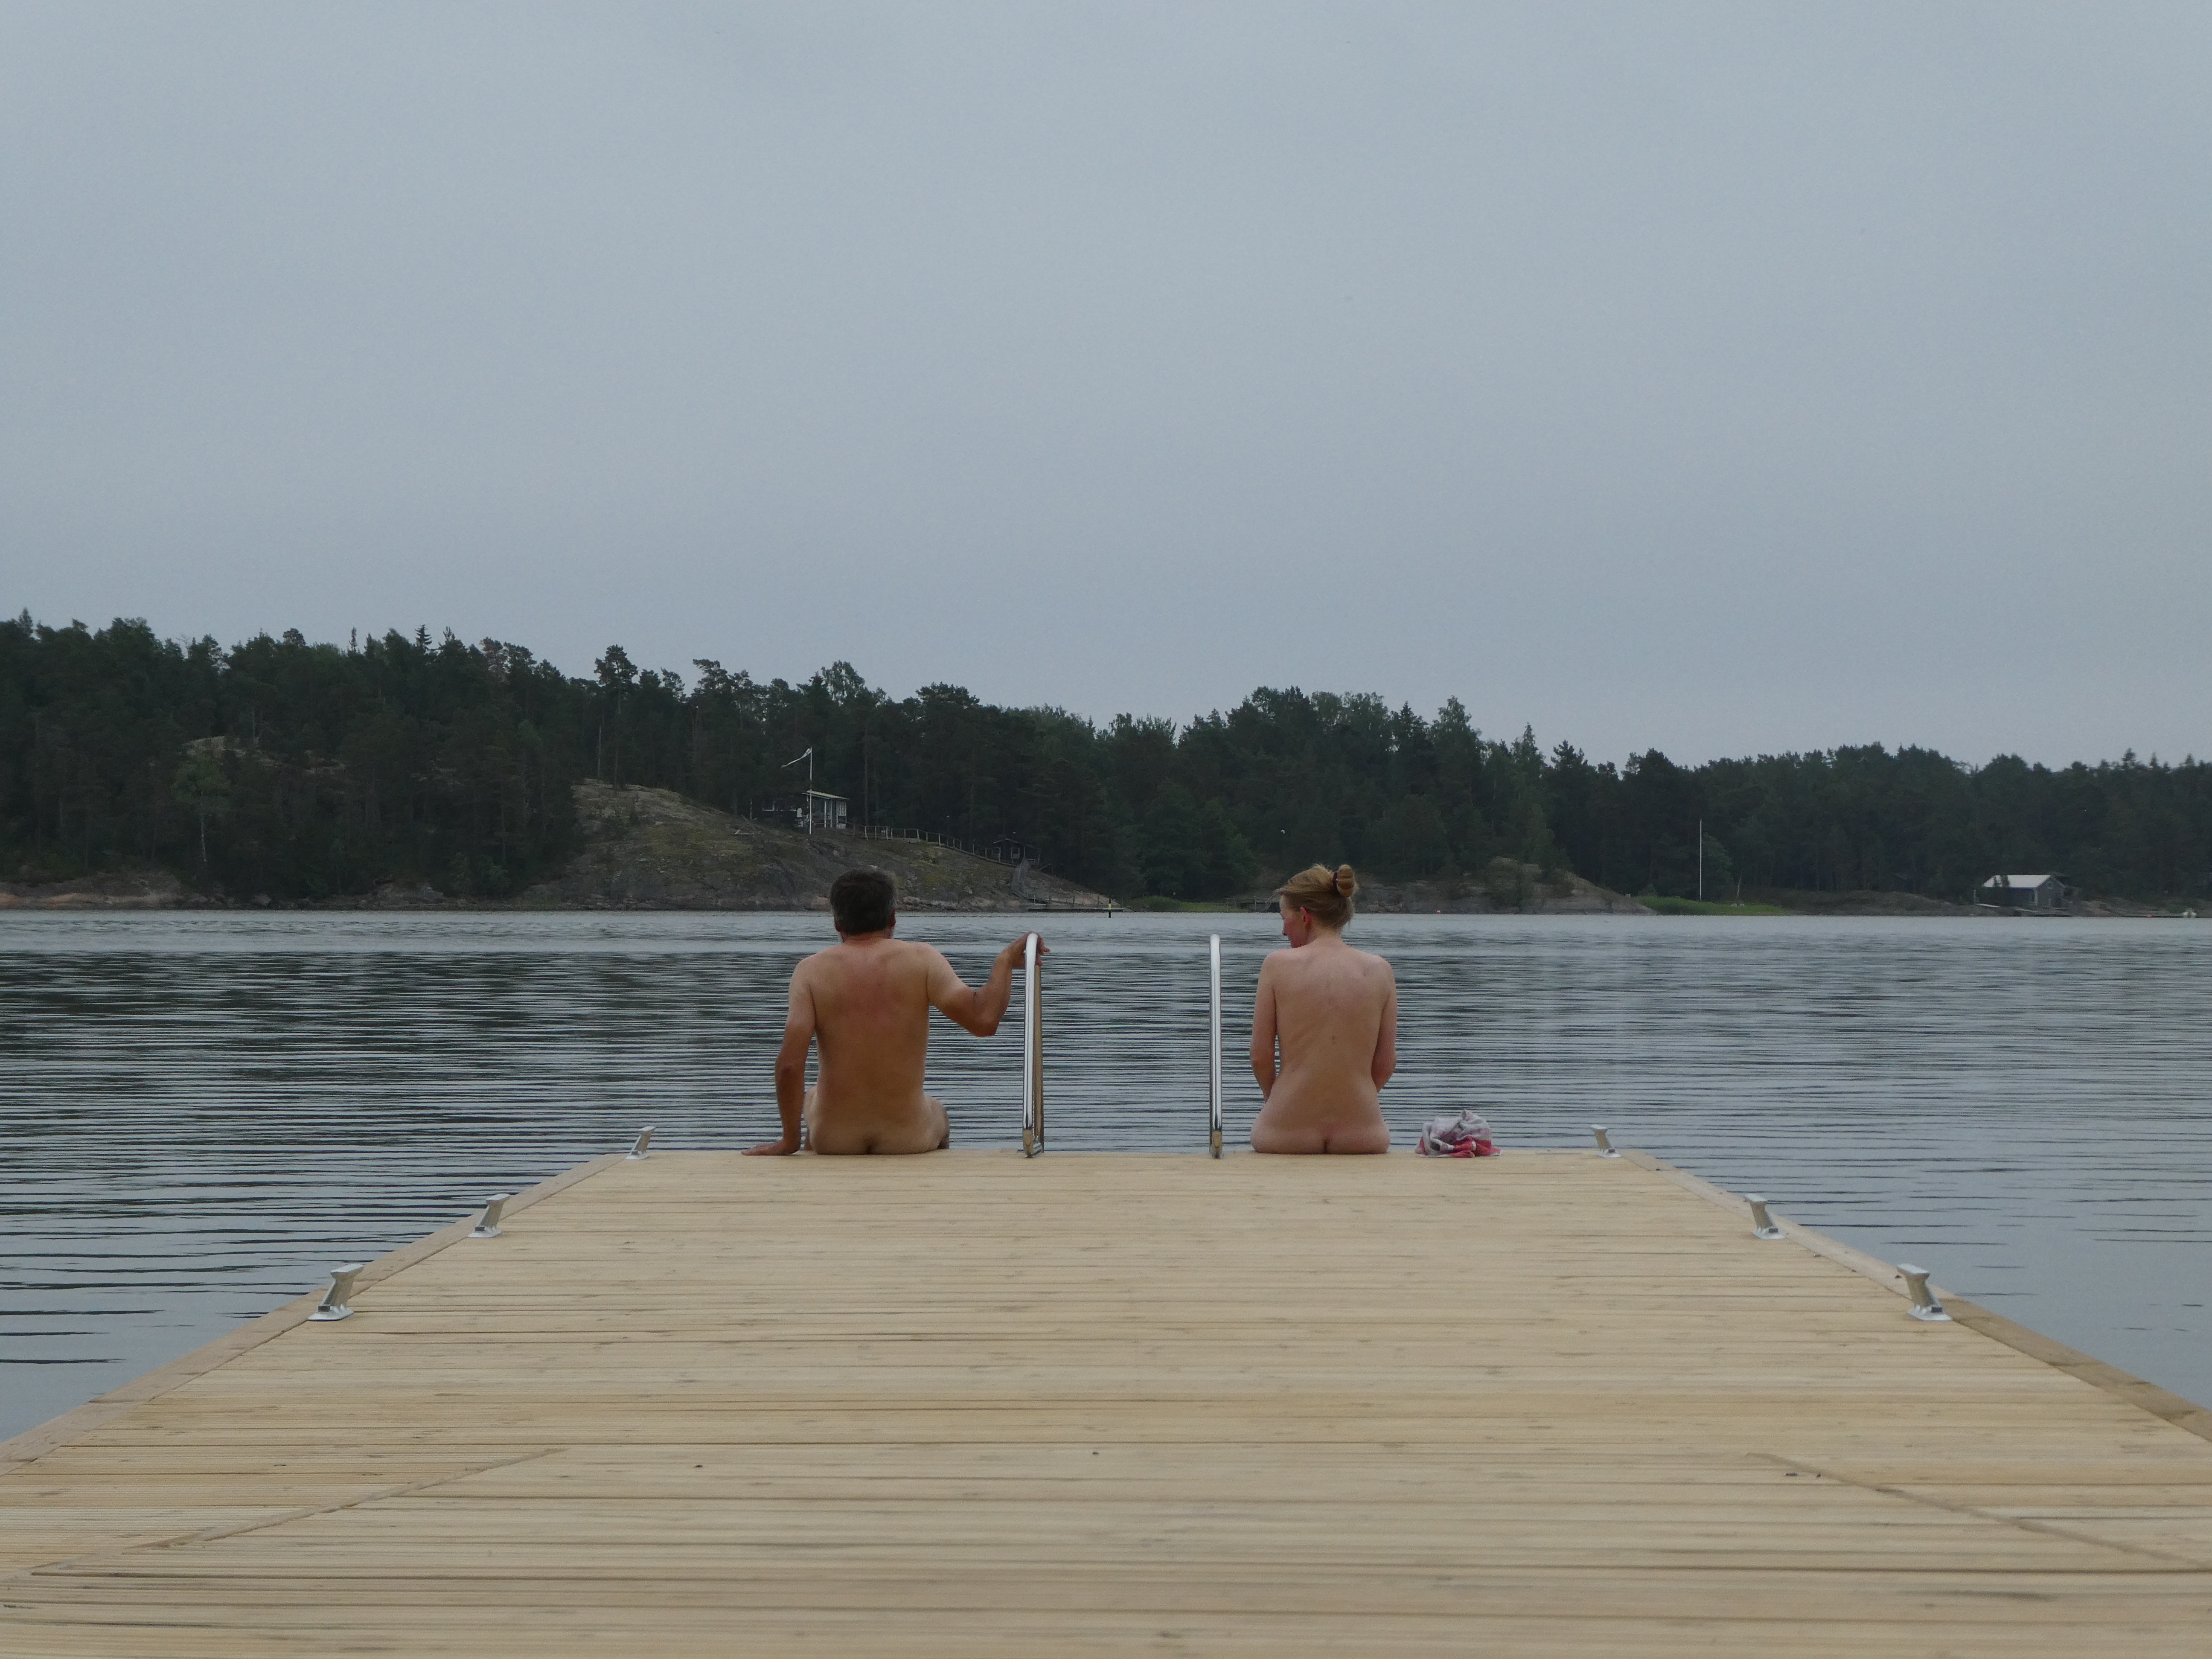 Big question after the Sauna: Do we really want to dive into the cold Baltic Sea?